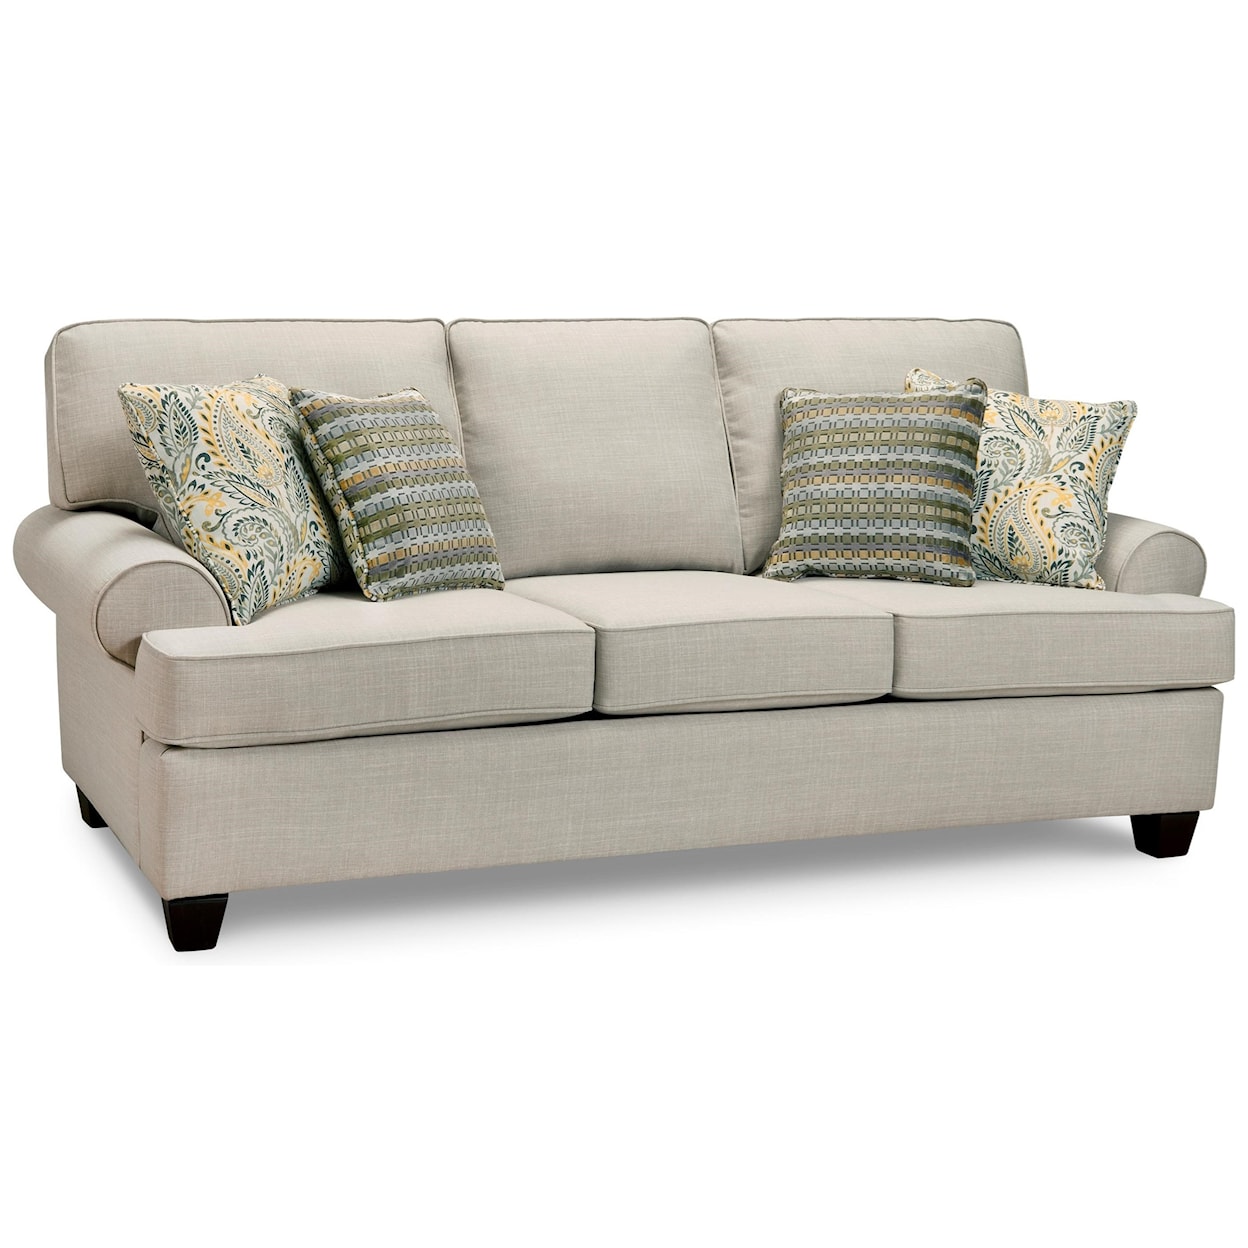 Superstyle 9698 Sofa